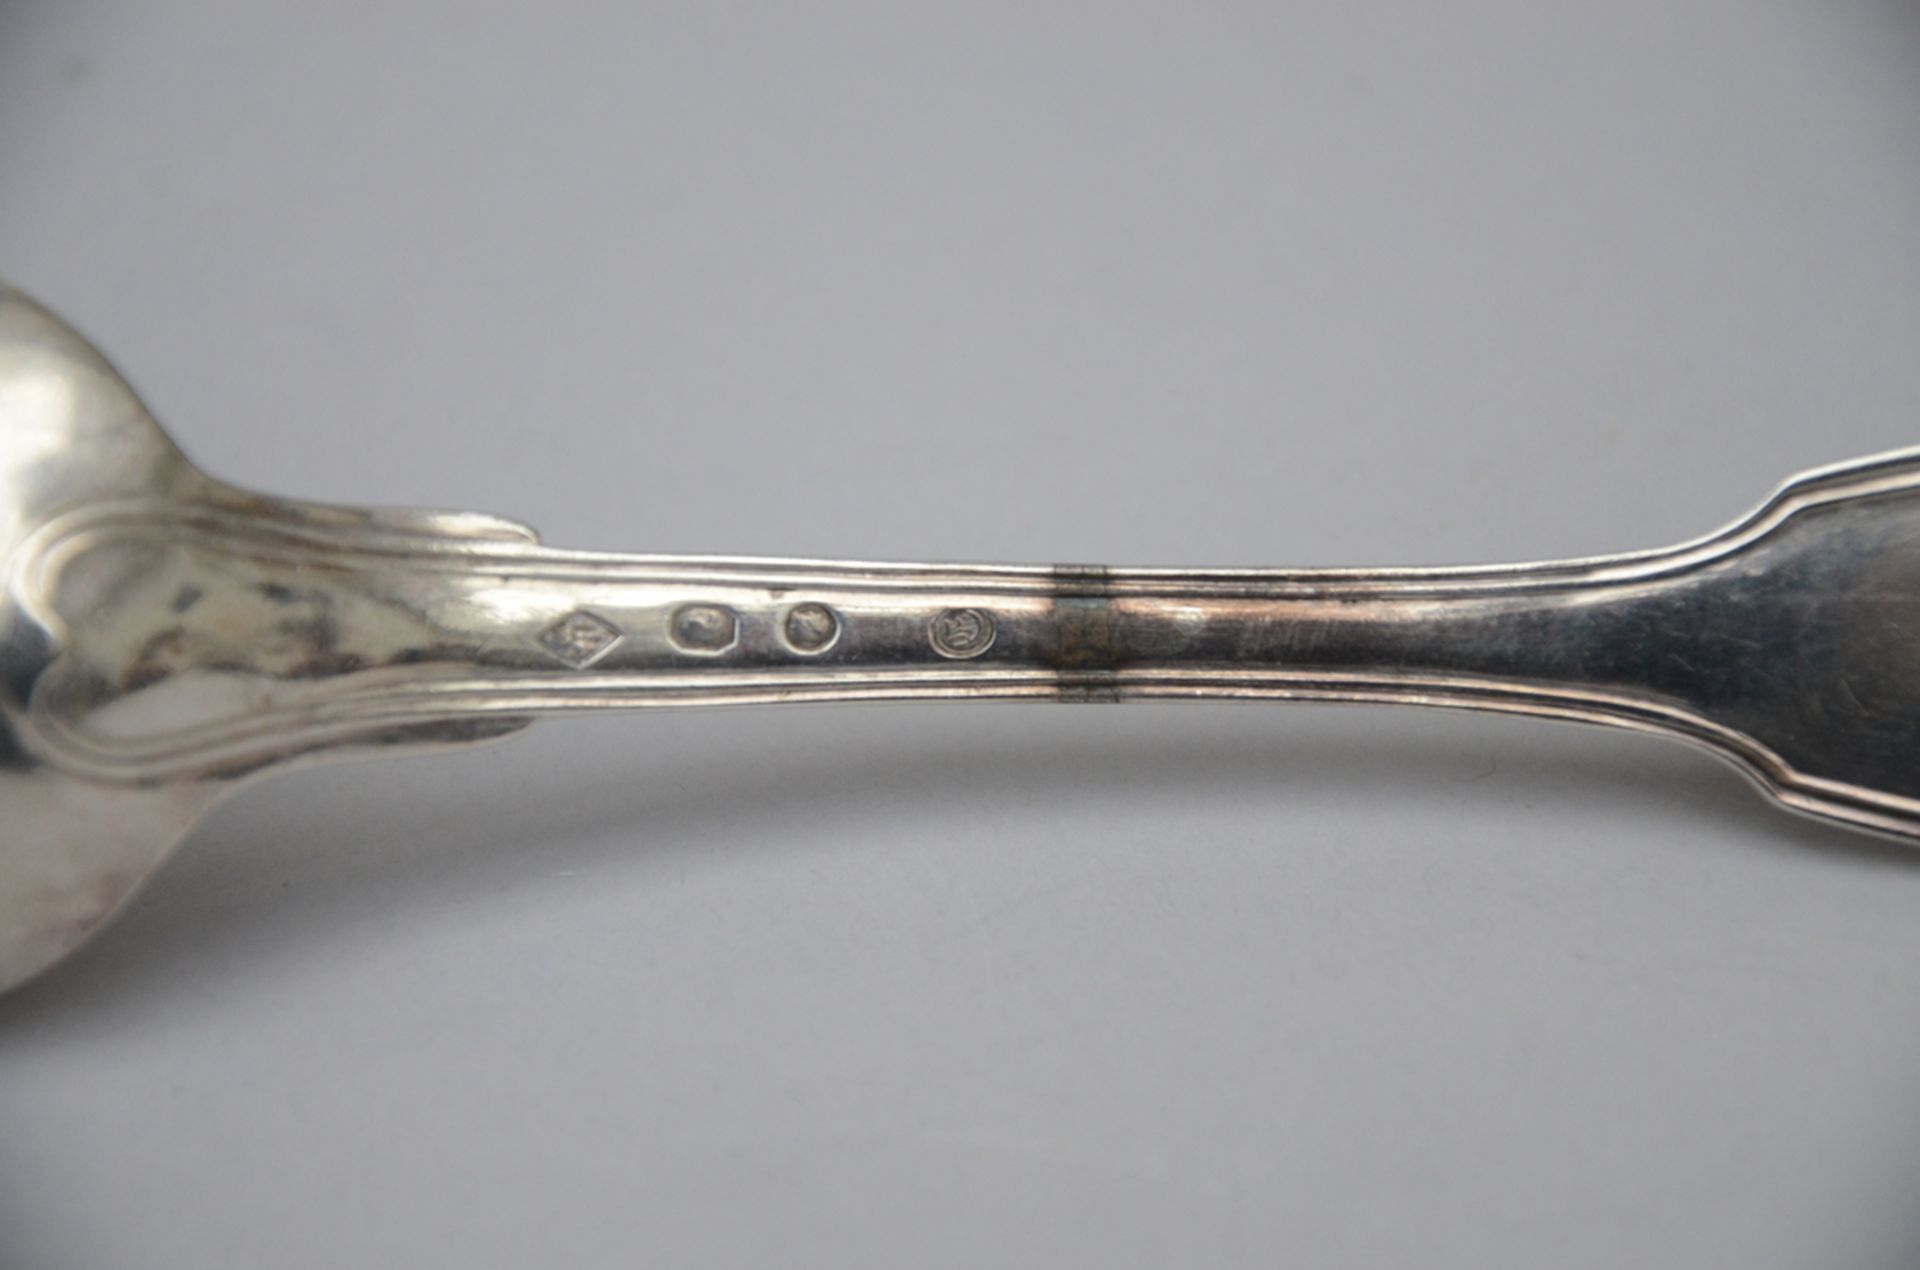 Part of a cutlery set in silver and silverplate metal - Image 2 of 4